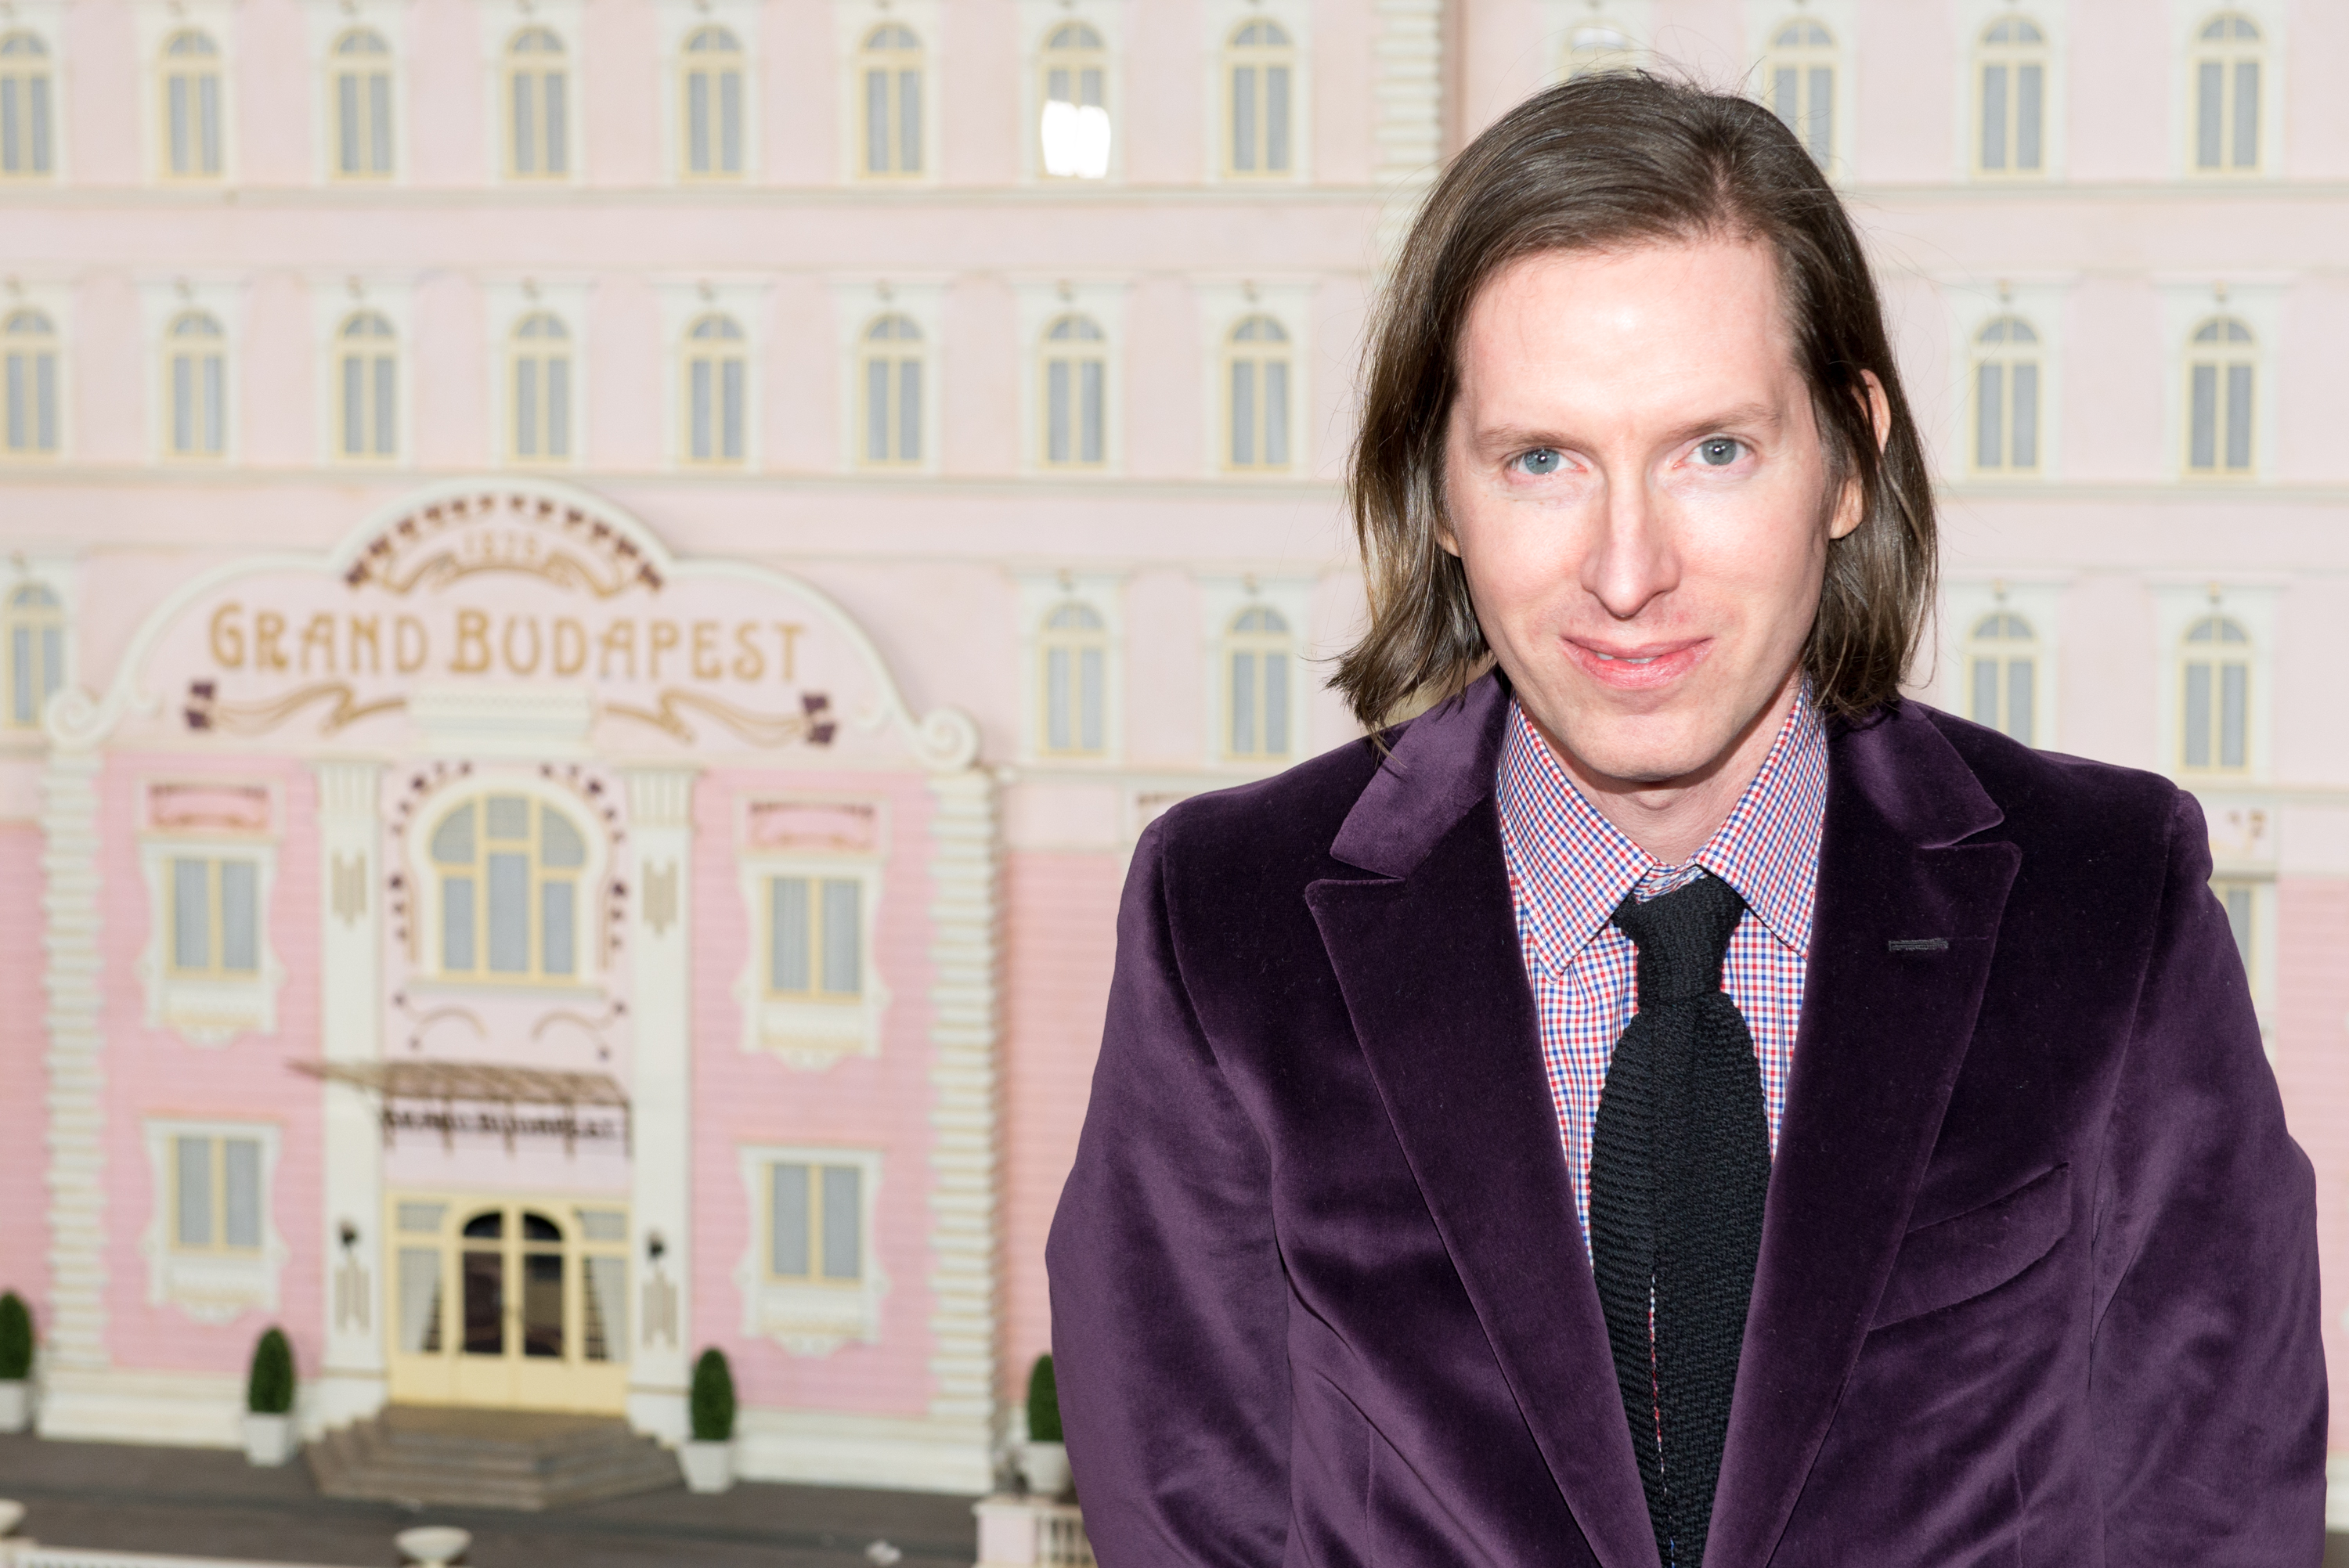 Director Wes Anderson attends "The Grand Budapest Hotel" premiere at Alice Tully Hall on Feb. 26, 2014 in New York City. (Mike Pont—FilmMagic/Getty Images)